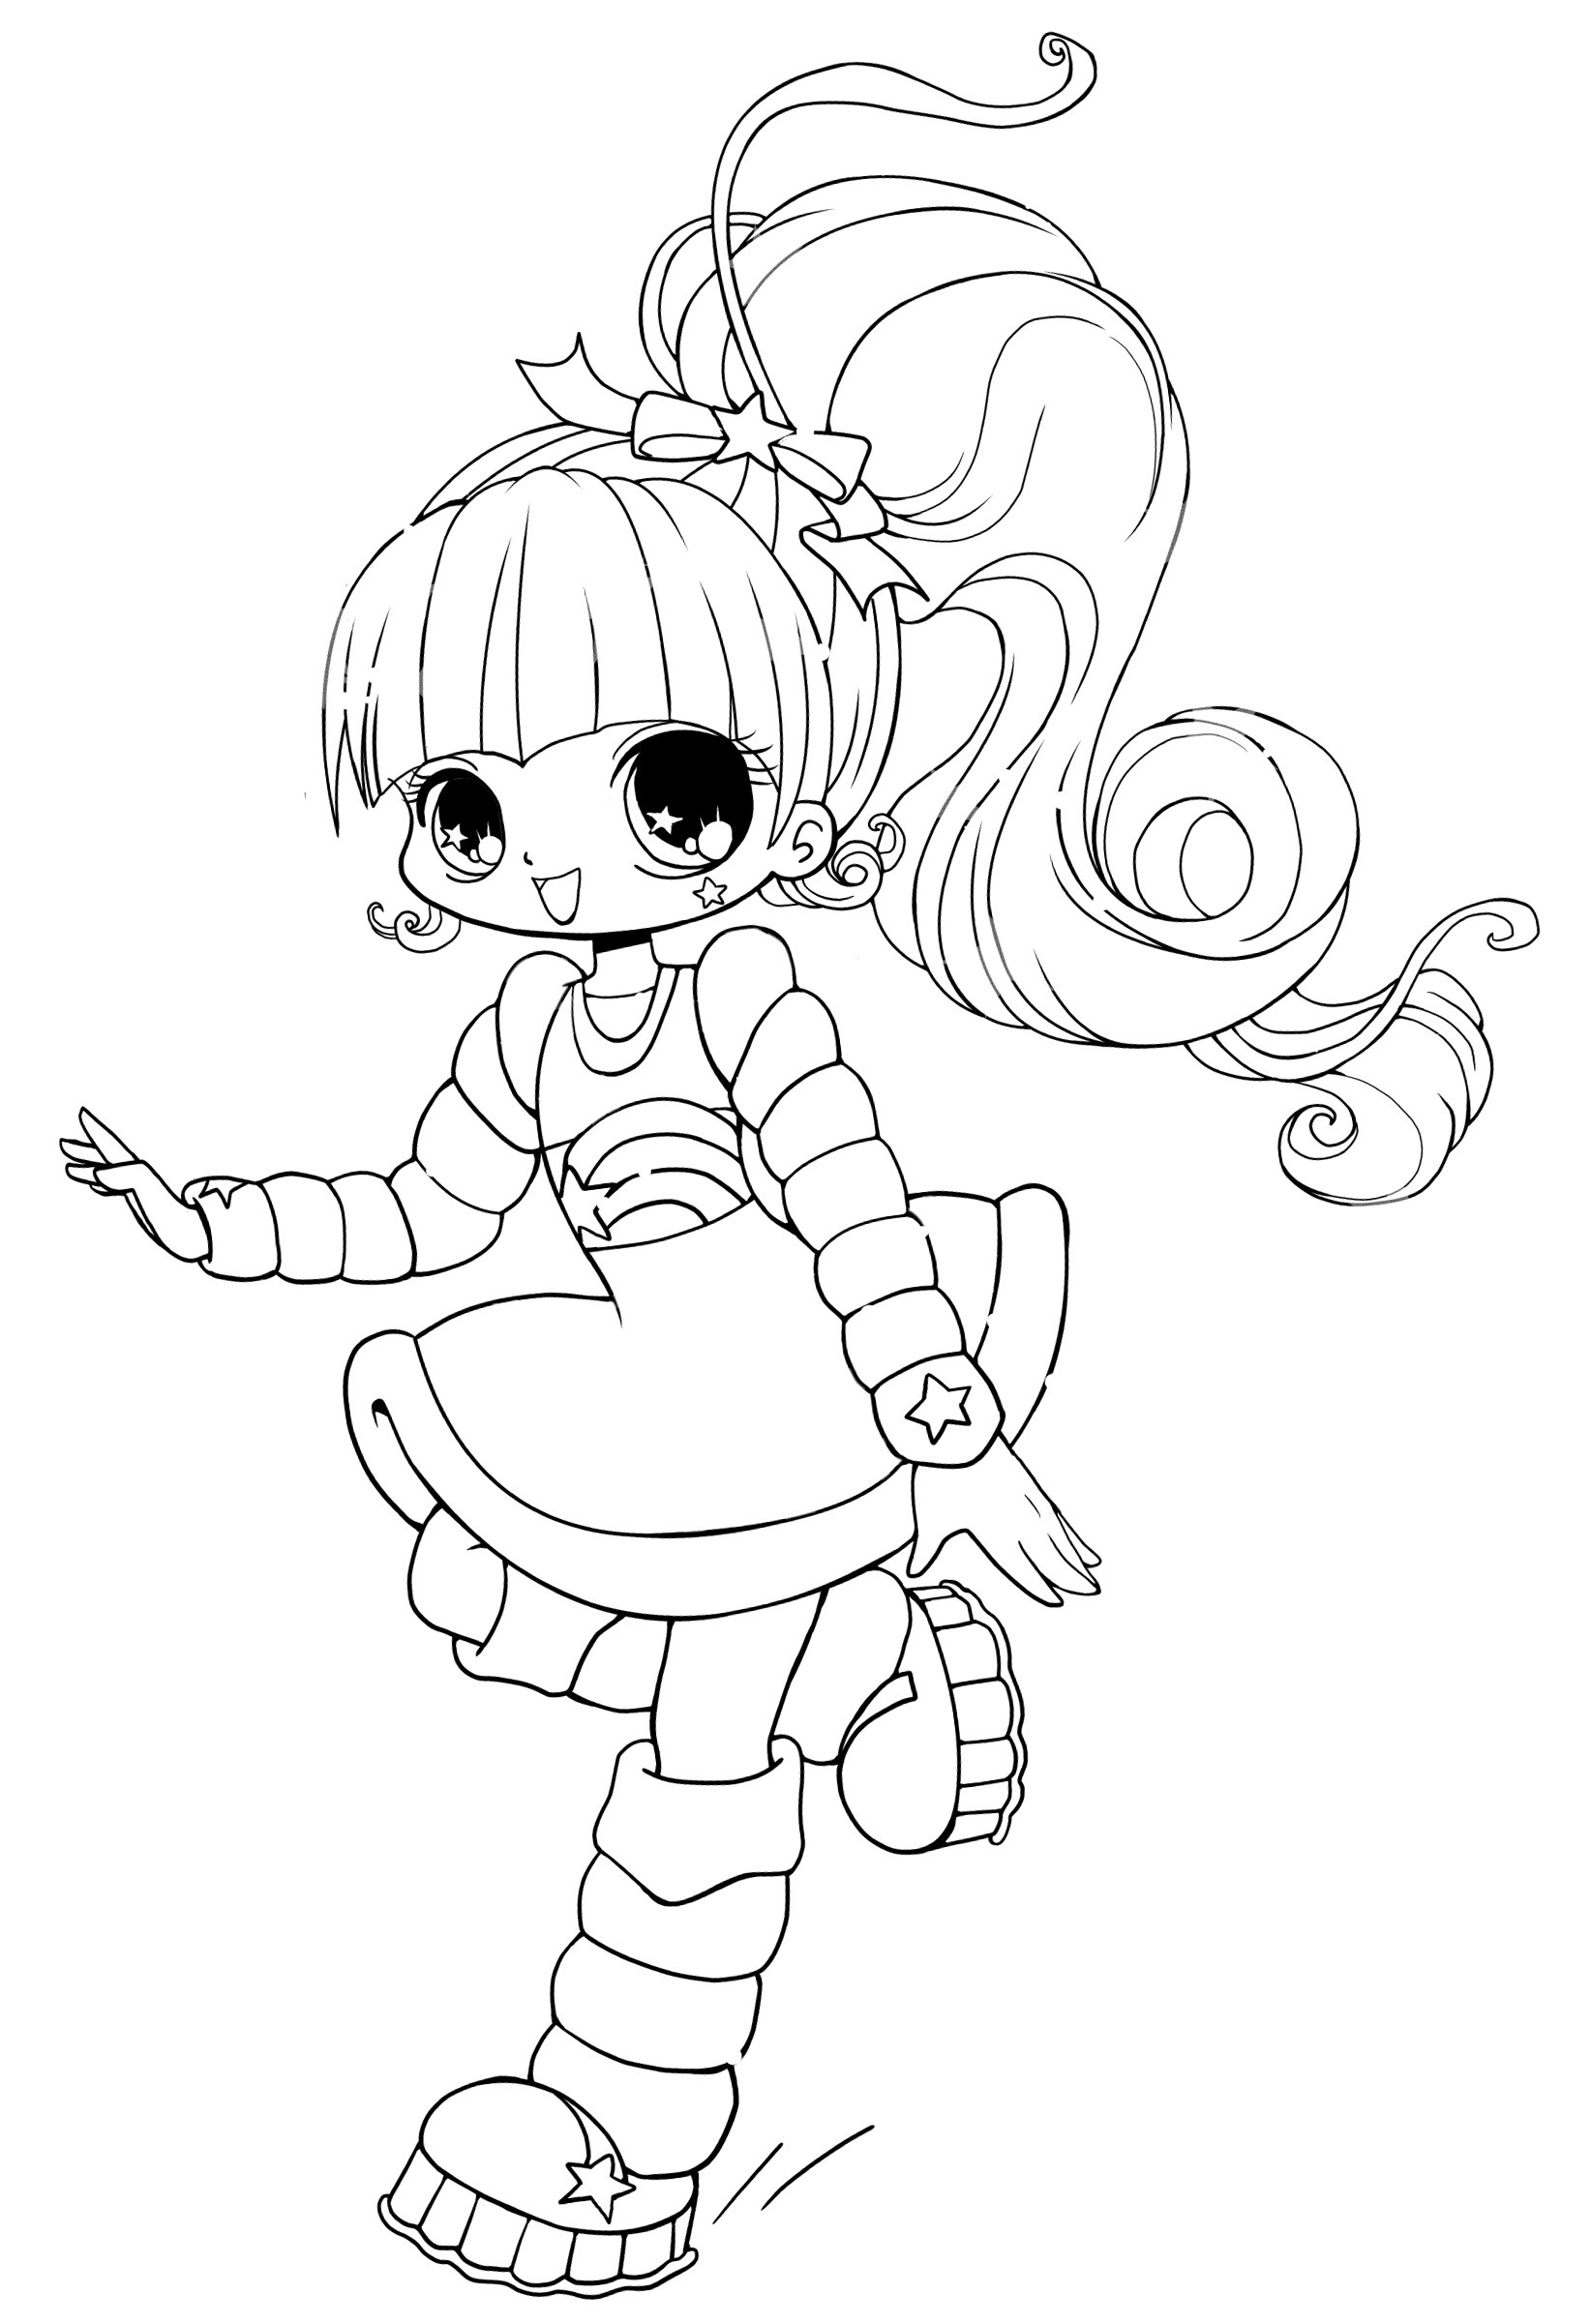 Cute Coloring Pages For Kids
 Free Printable Chibi Coloring Pages For Kids